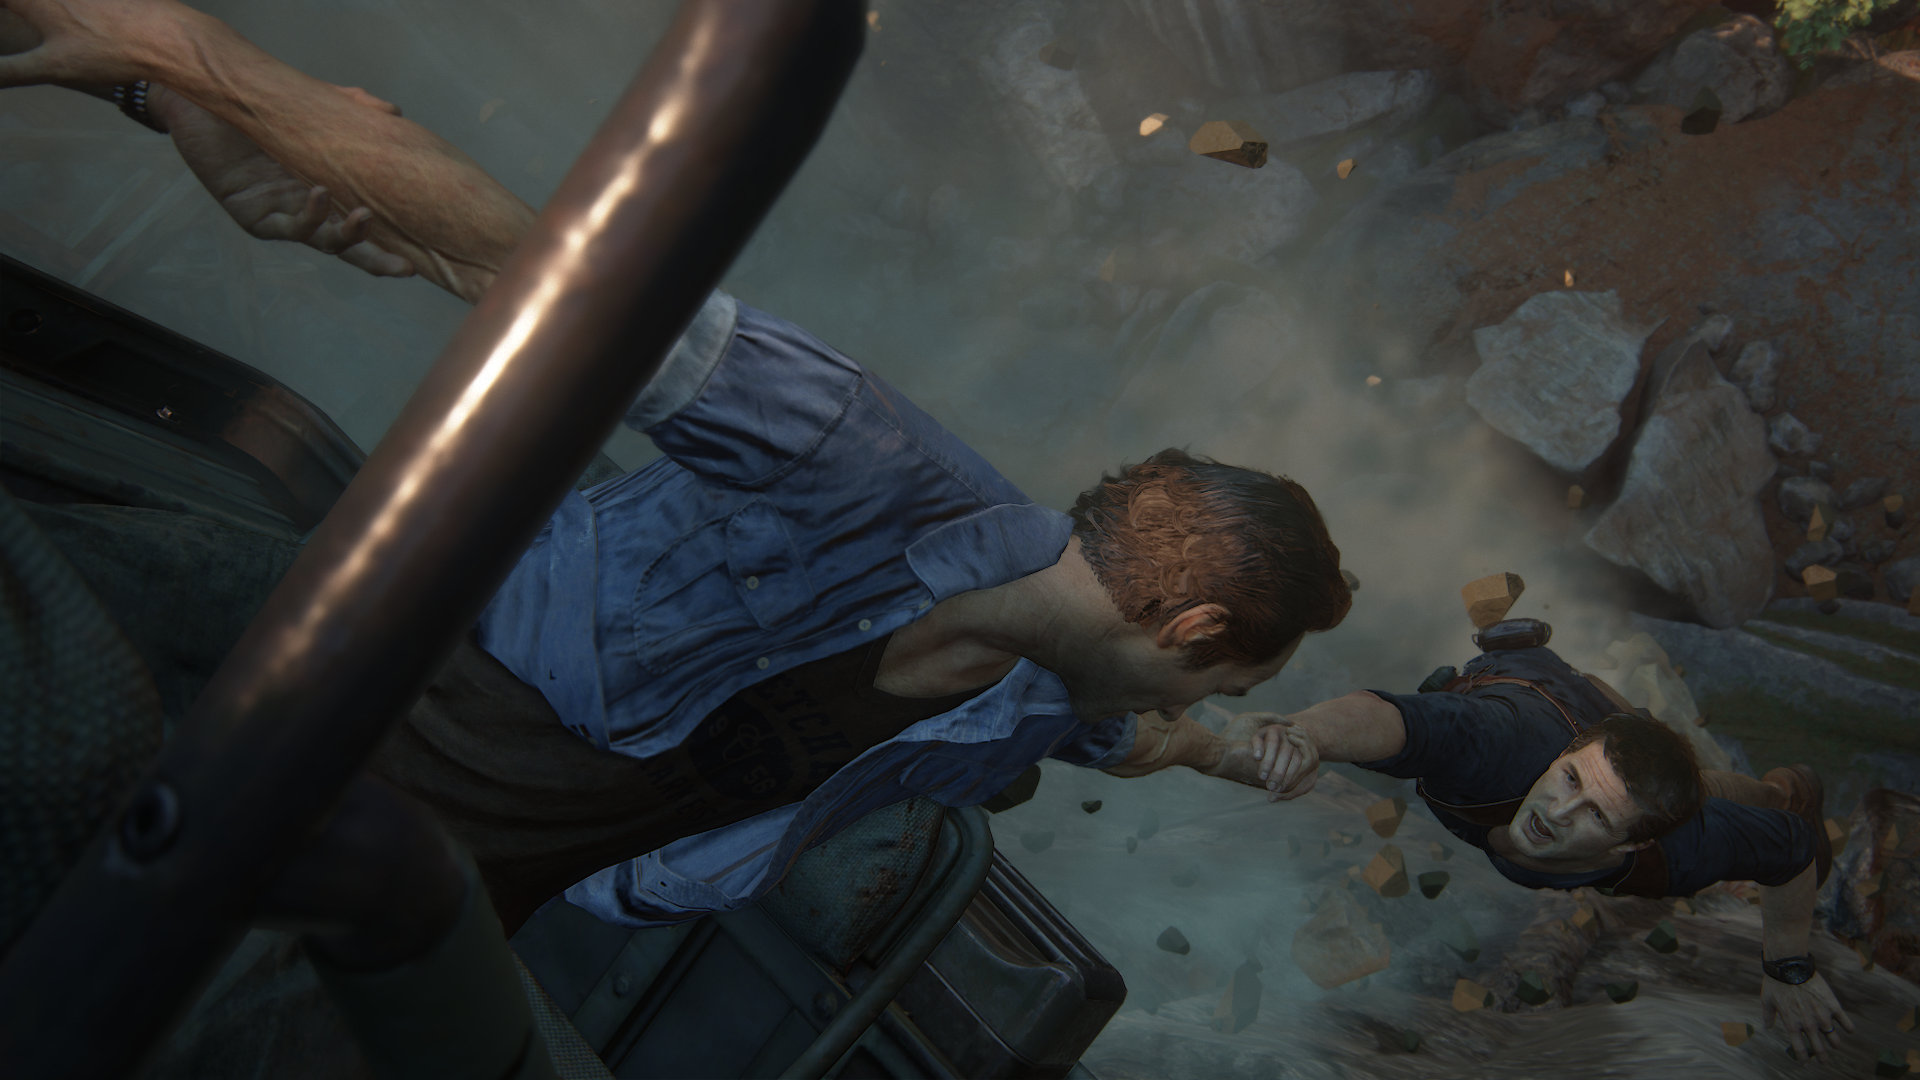 uncharted-4-a-thiefs-end-screen-07-ps4-us-09mar16